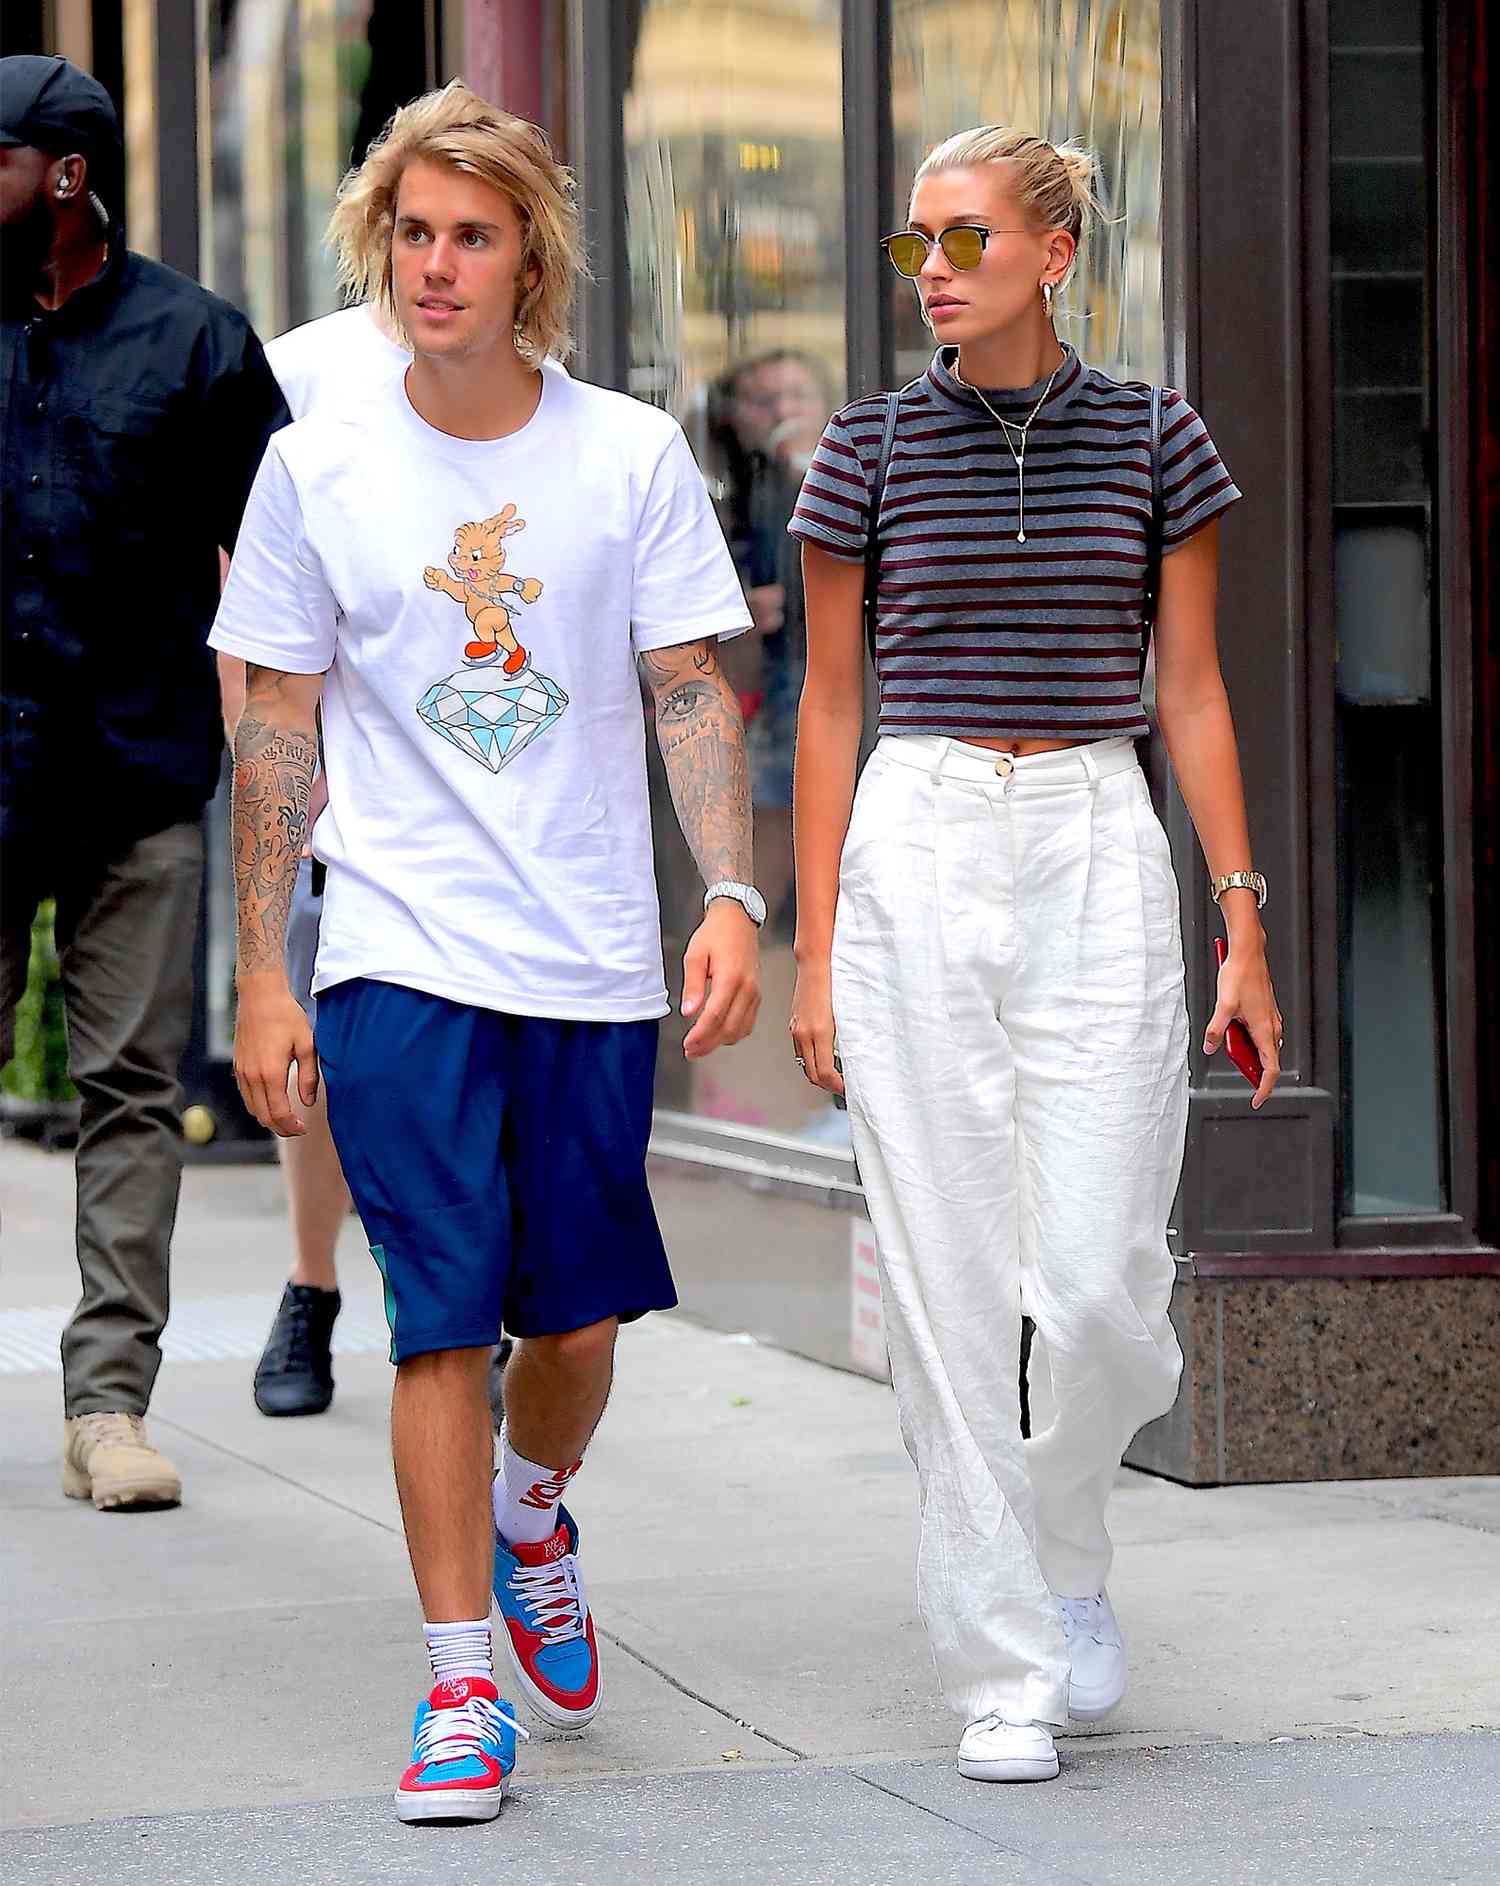 Justin Bieber And Hailey Baldwin Take A Stroll In New York After Attending Church Together